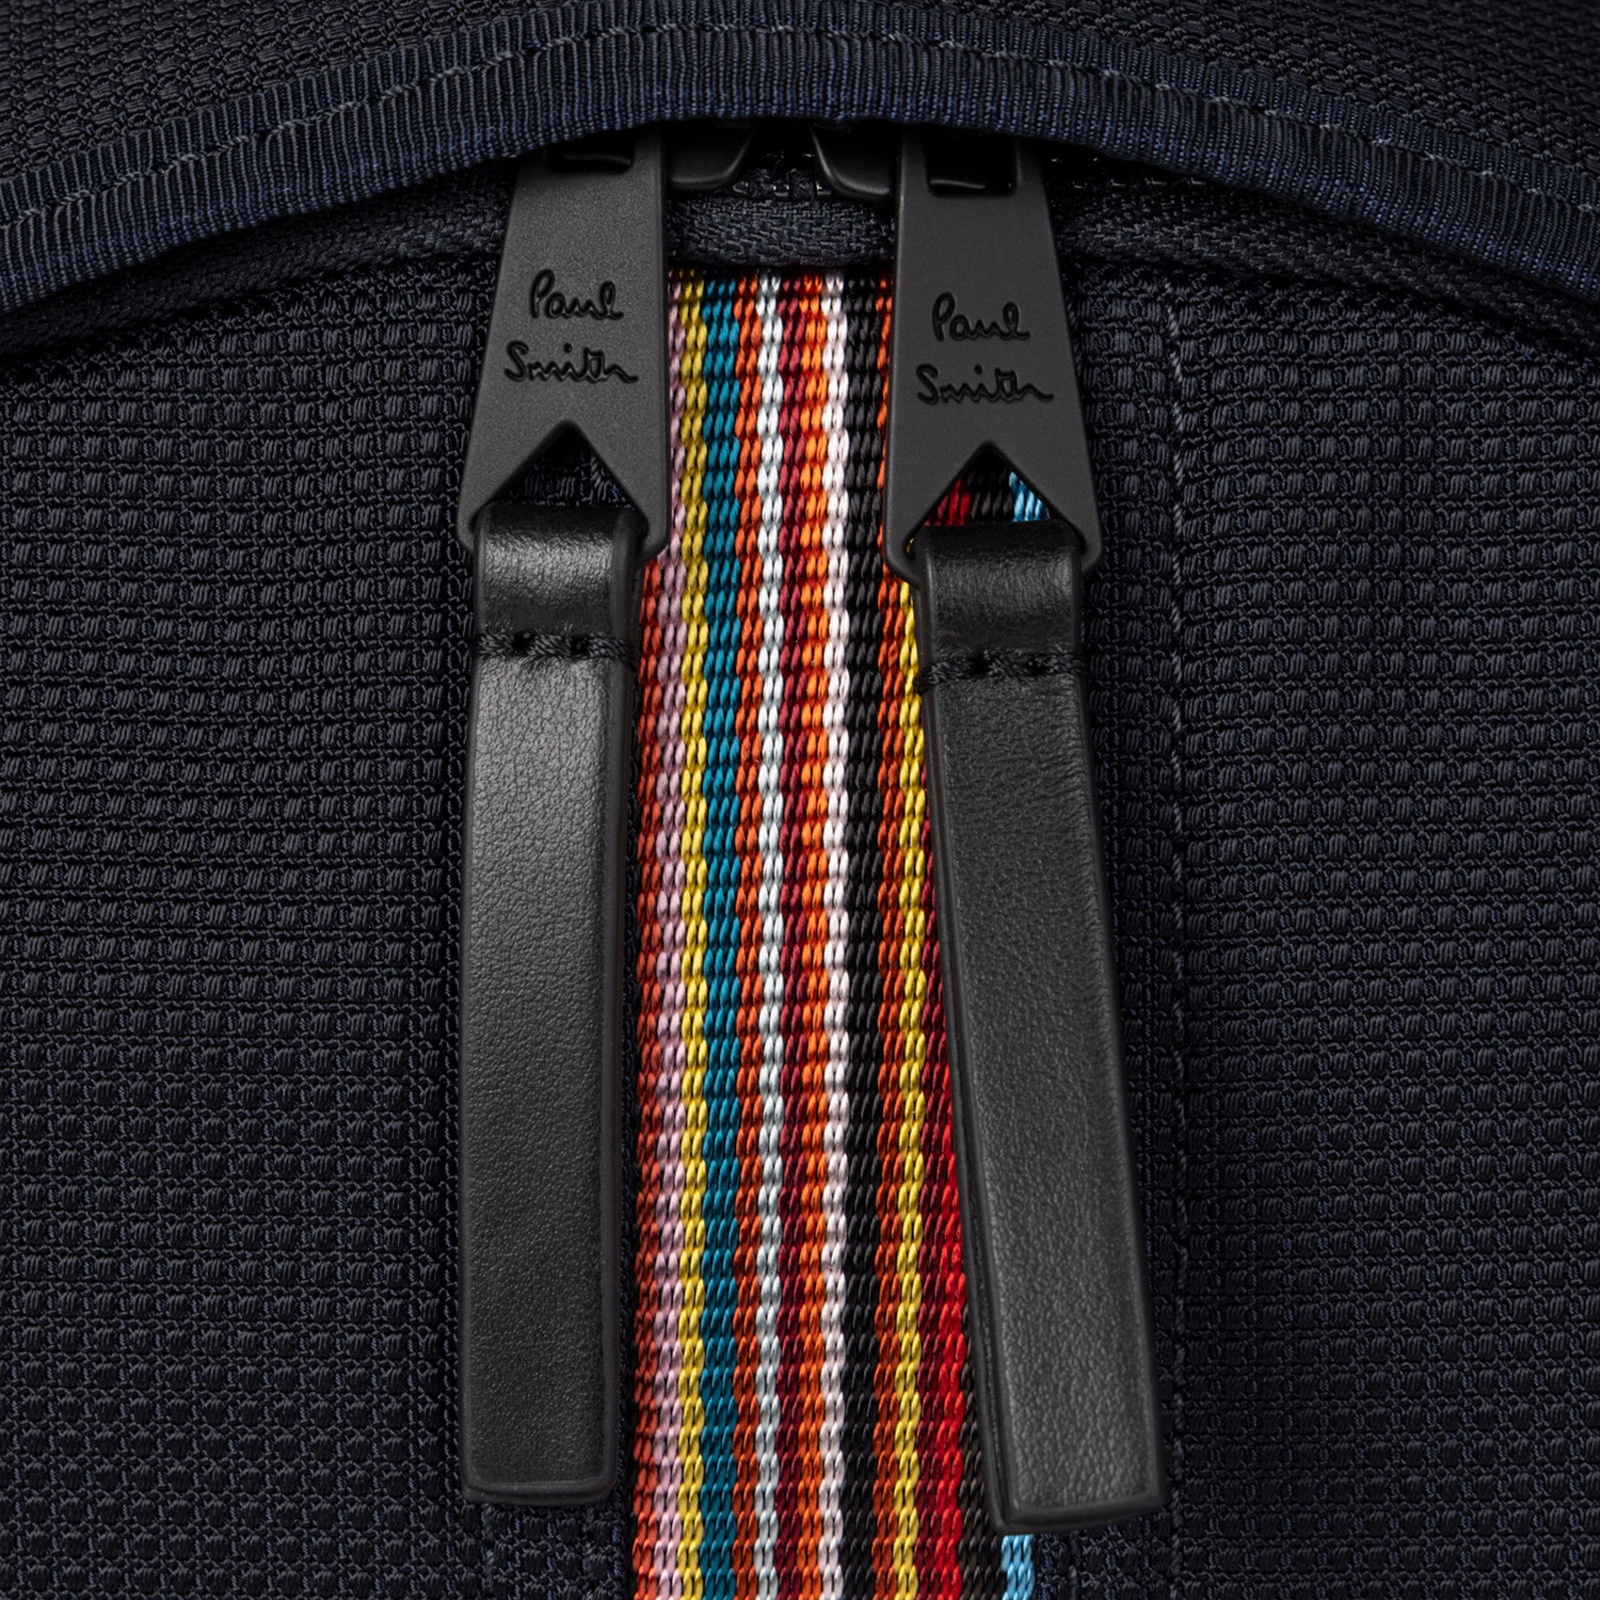 Paul Smith Canvas Backpack - 4